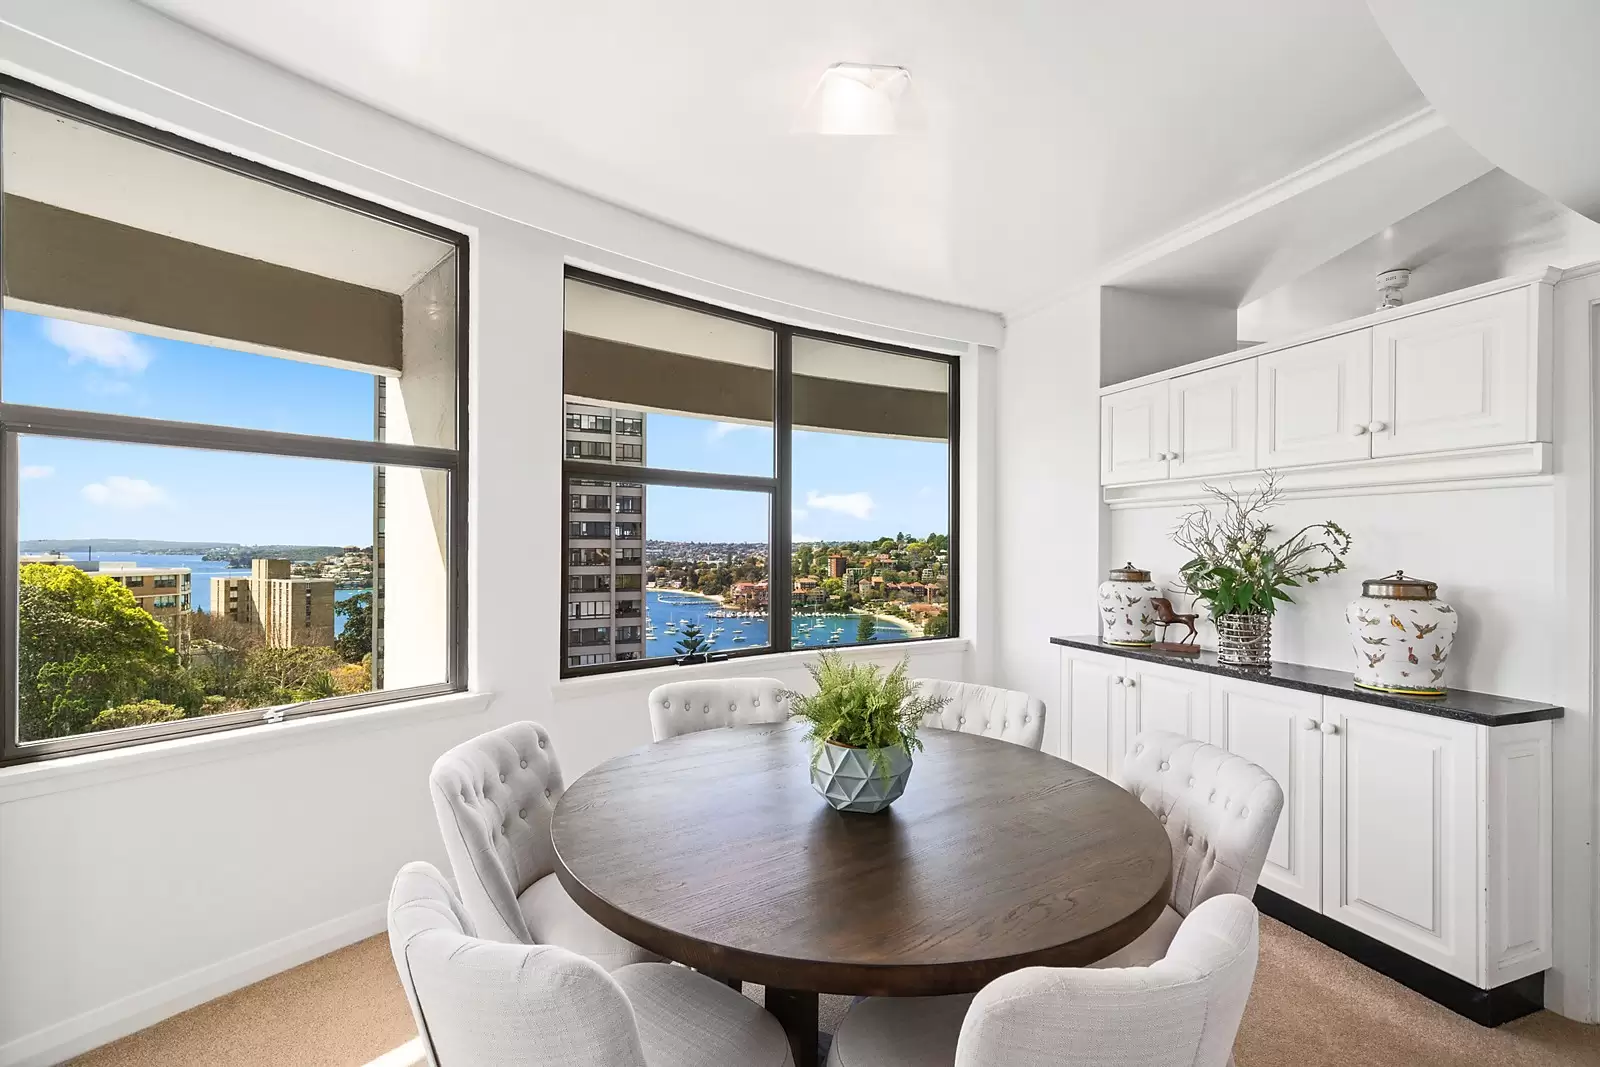 Photo #4: 9/75-79 Darling Point Road, Darling Point - Sold by Sydney Sotheby's International Realty